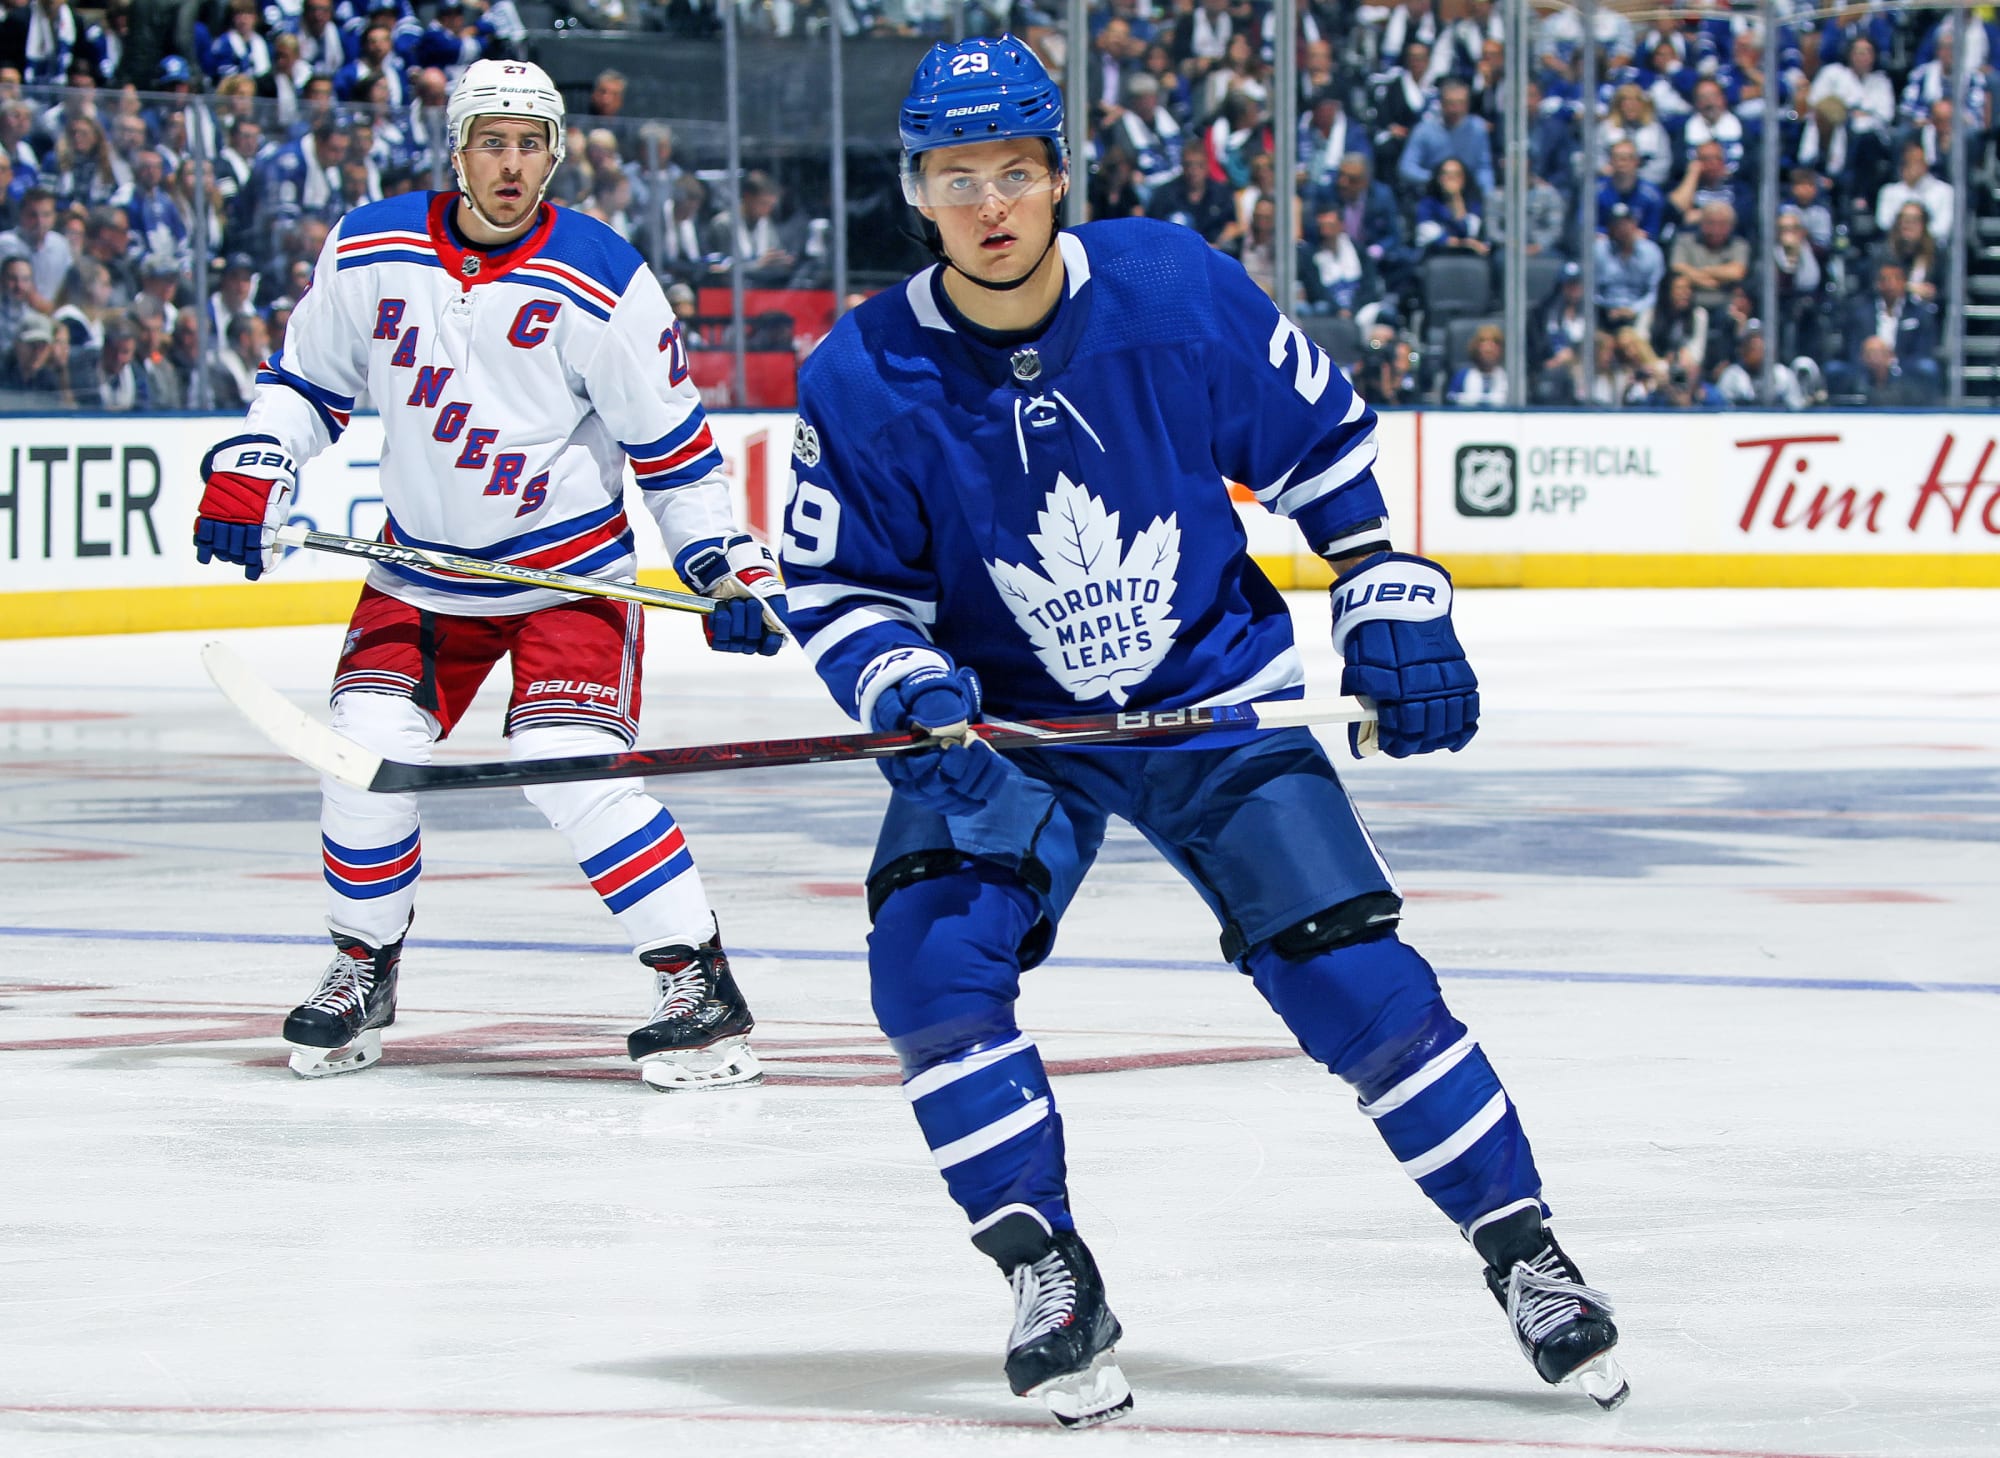 Who should the New York Rangers trade for William Nylander